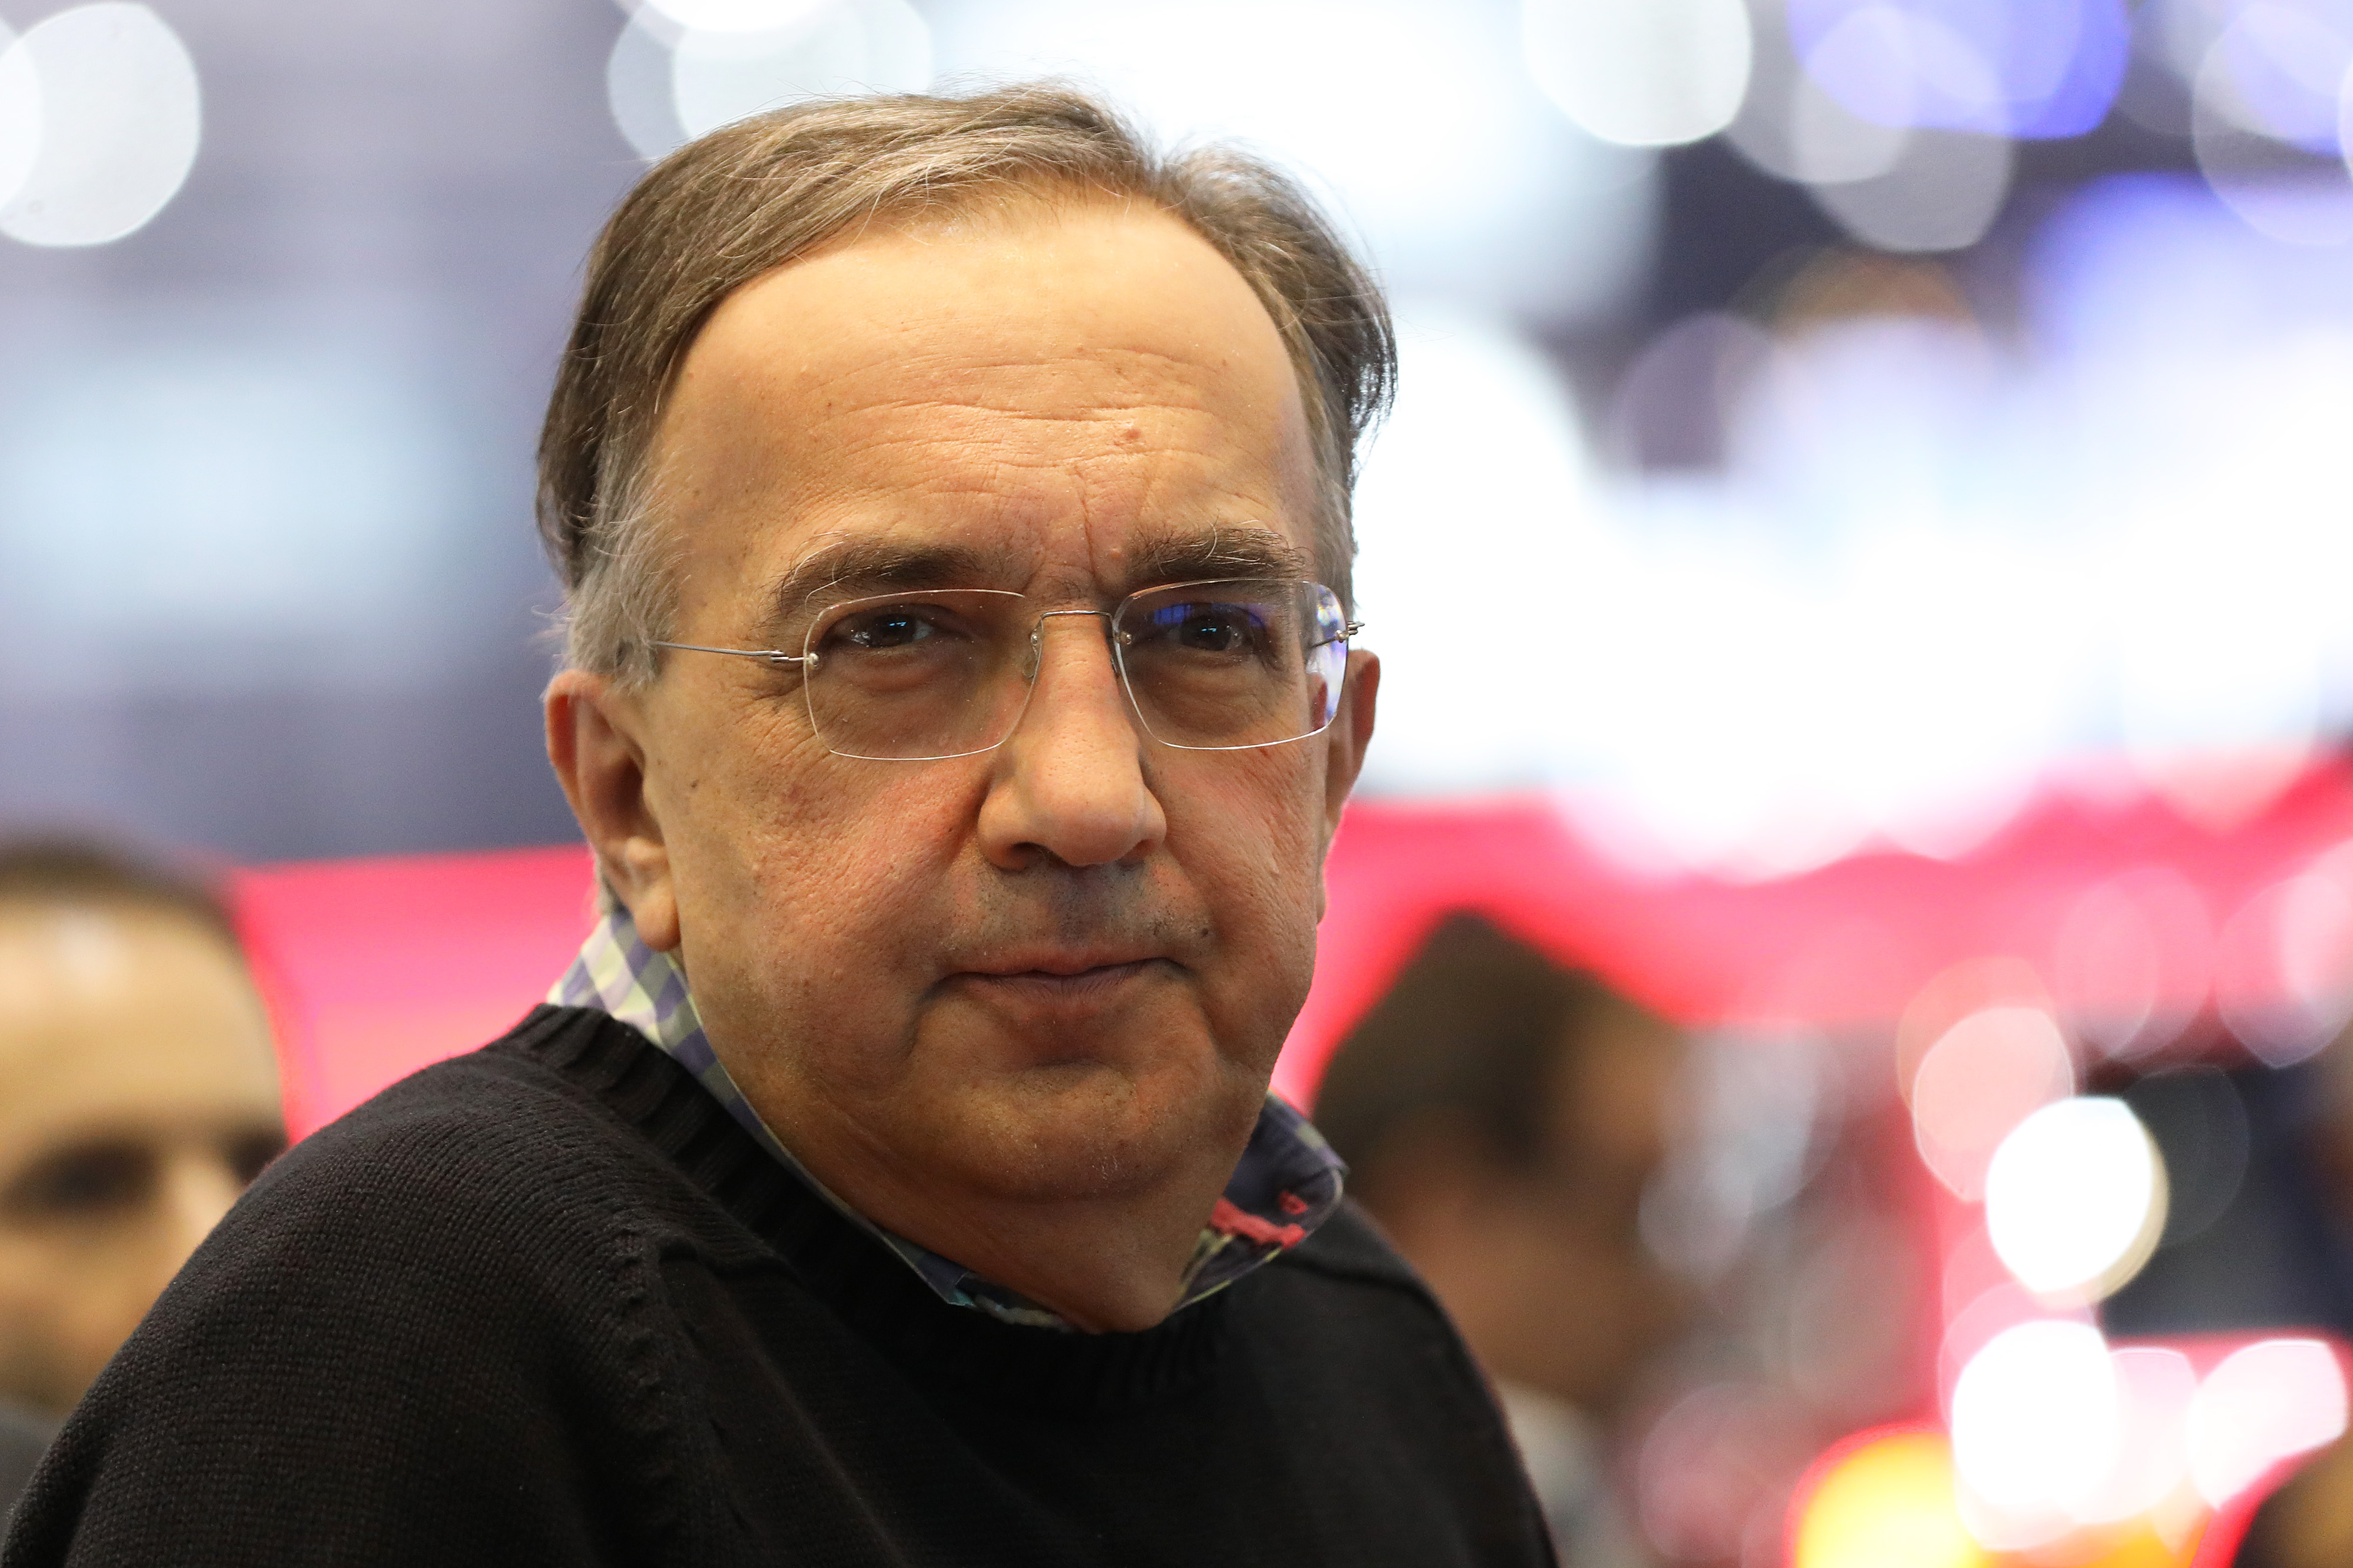 Sergio Marchionne, chief executive officer of Fiat Chrysler Automobiles NV, looks on during a launch event on the first day of the 87th Geneva International Motor Show in Geneva, Switzerland, on Tuesday, March 7, 2017. (Chris Ratcliffe—Bloomberg/Getty Images)